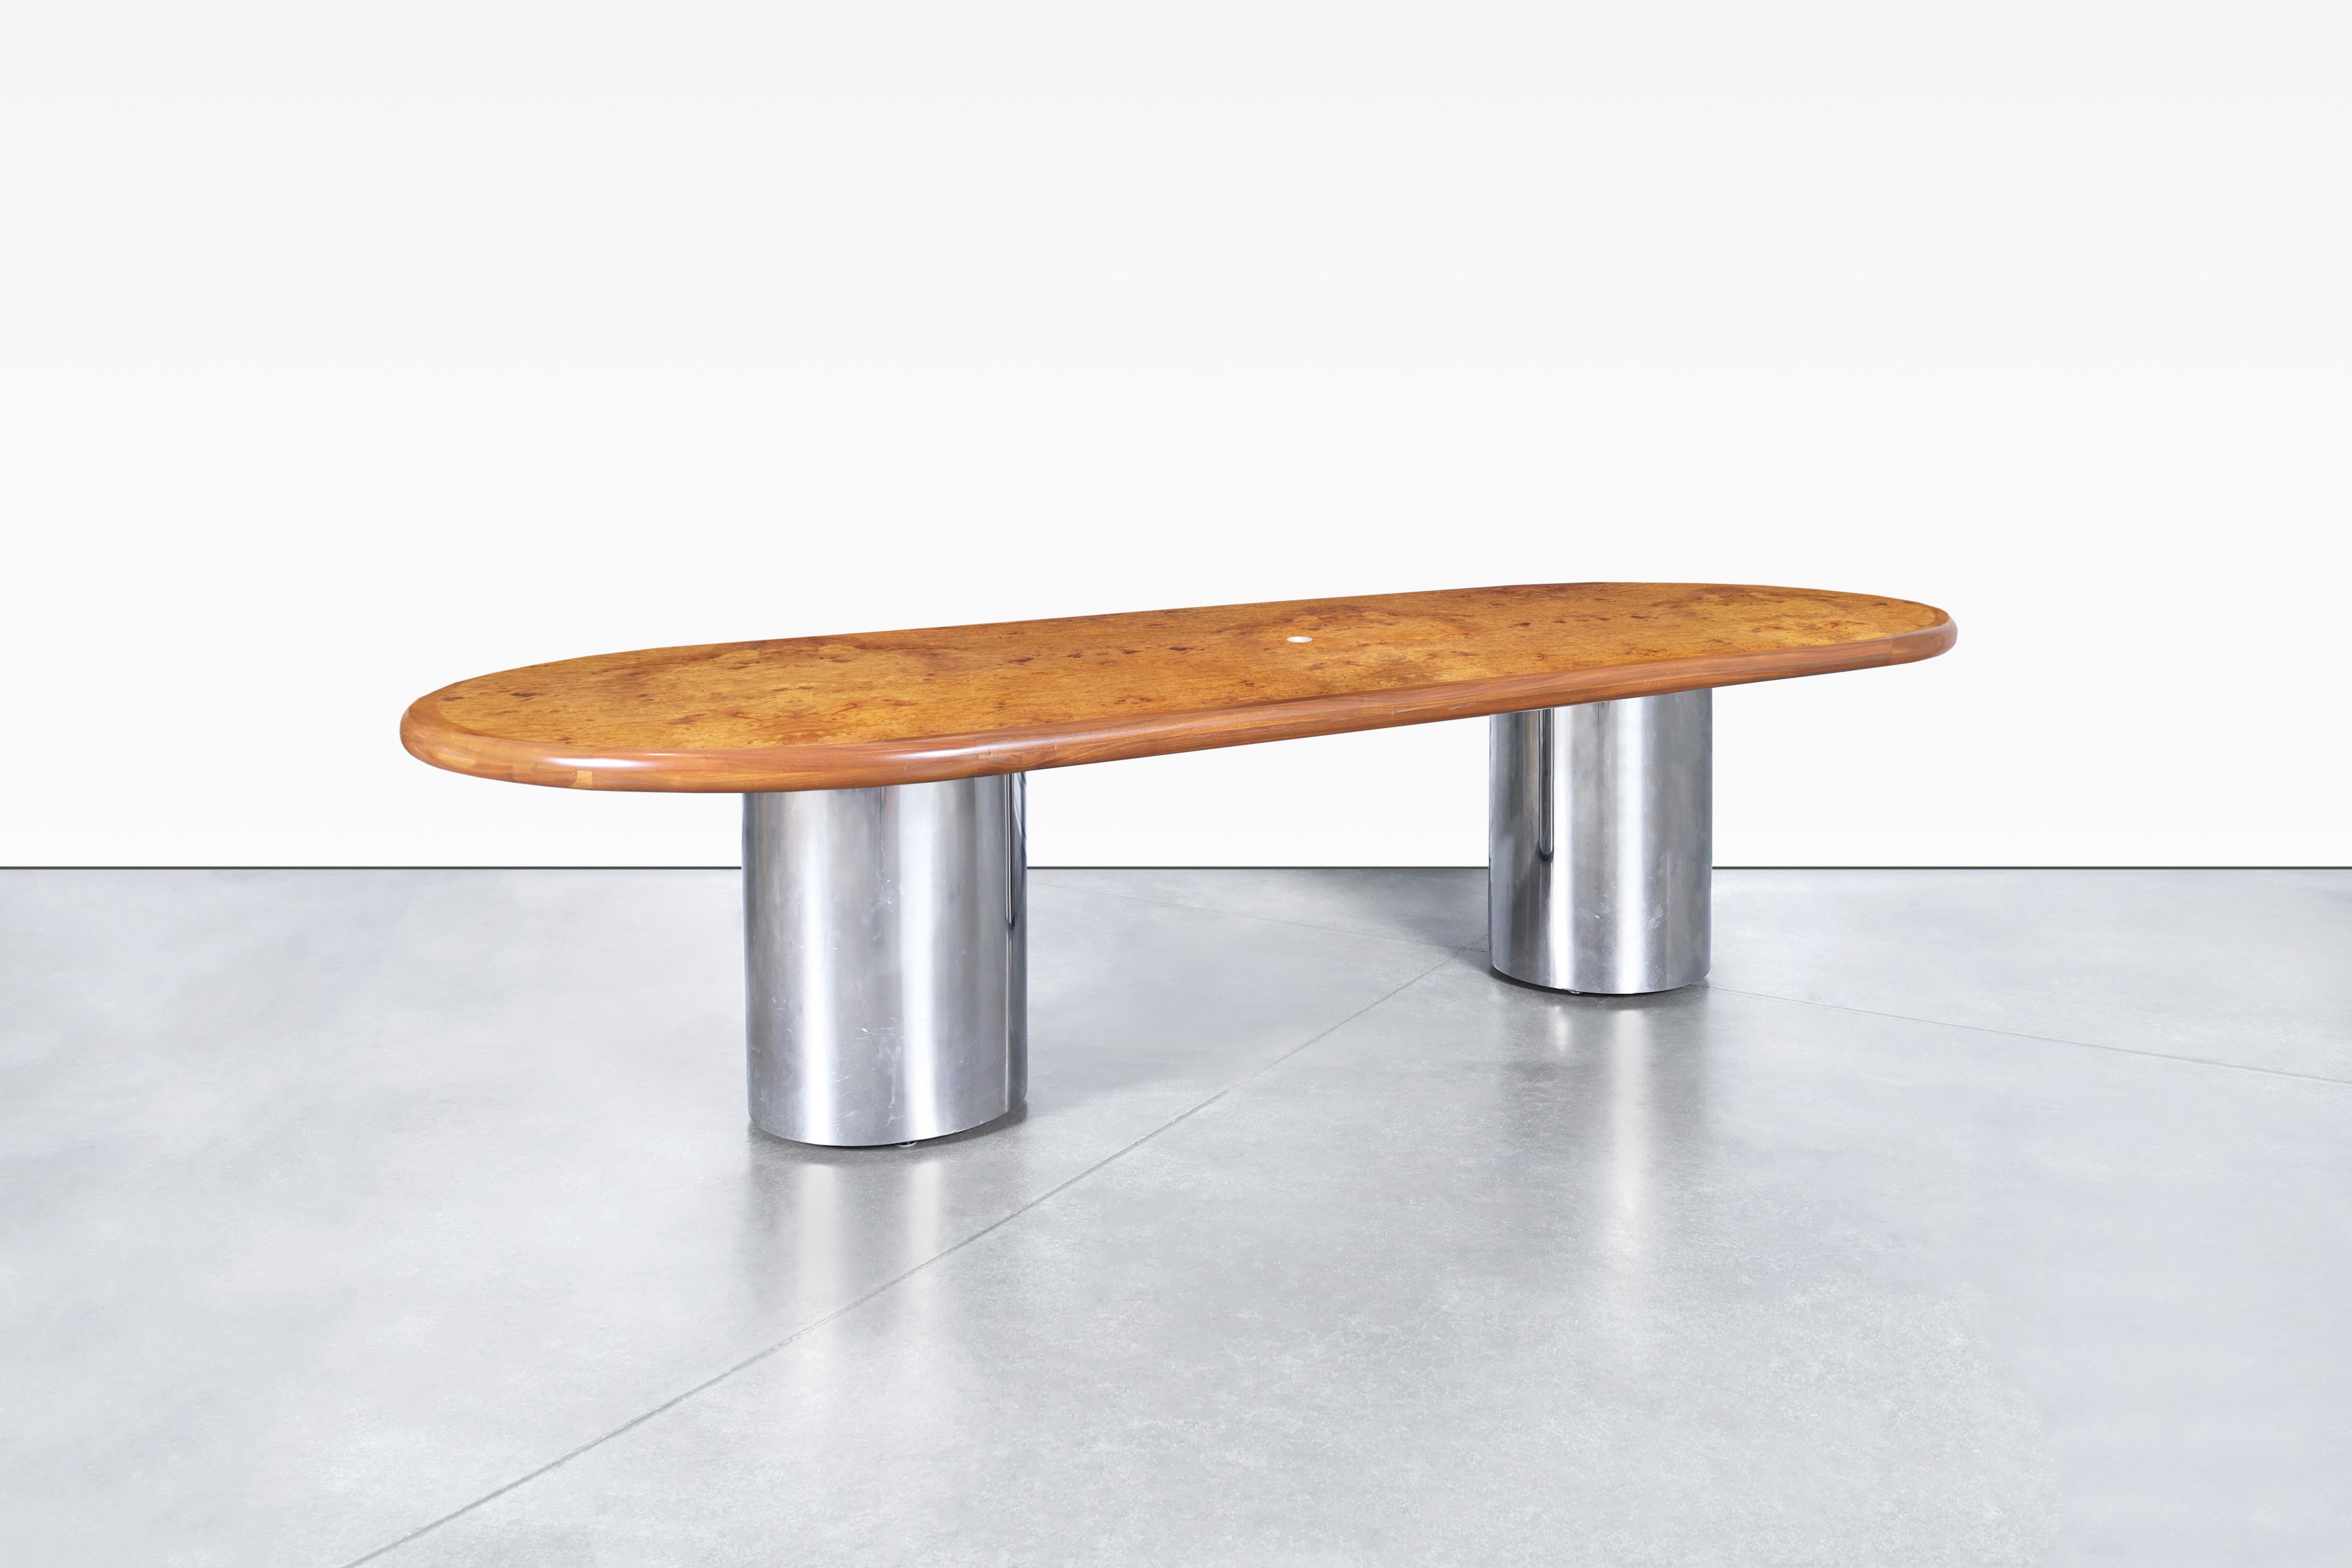 Late 20th Century Mid-Century Modern Burl Wood and Chrome Oval Dining Table or Conference Table For Sale